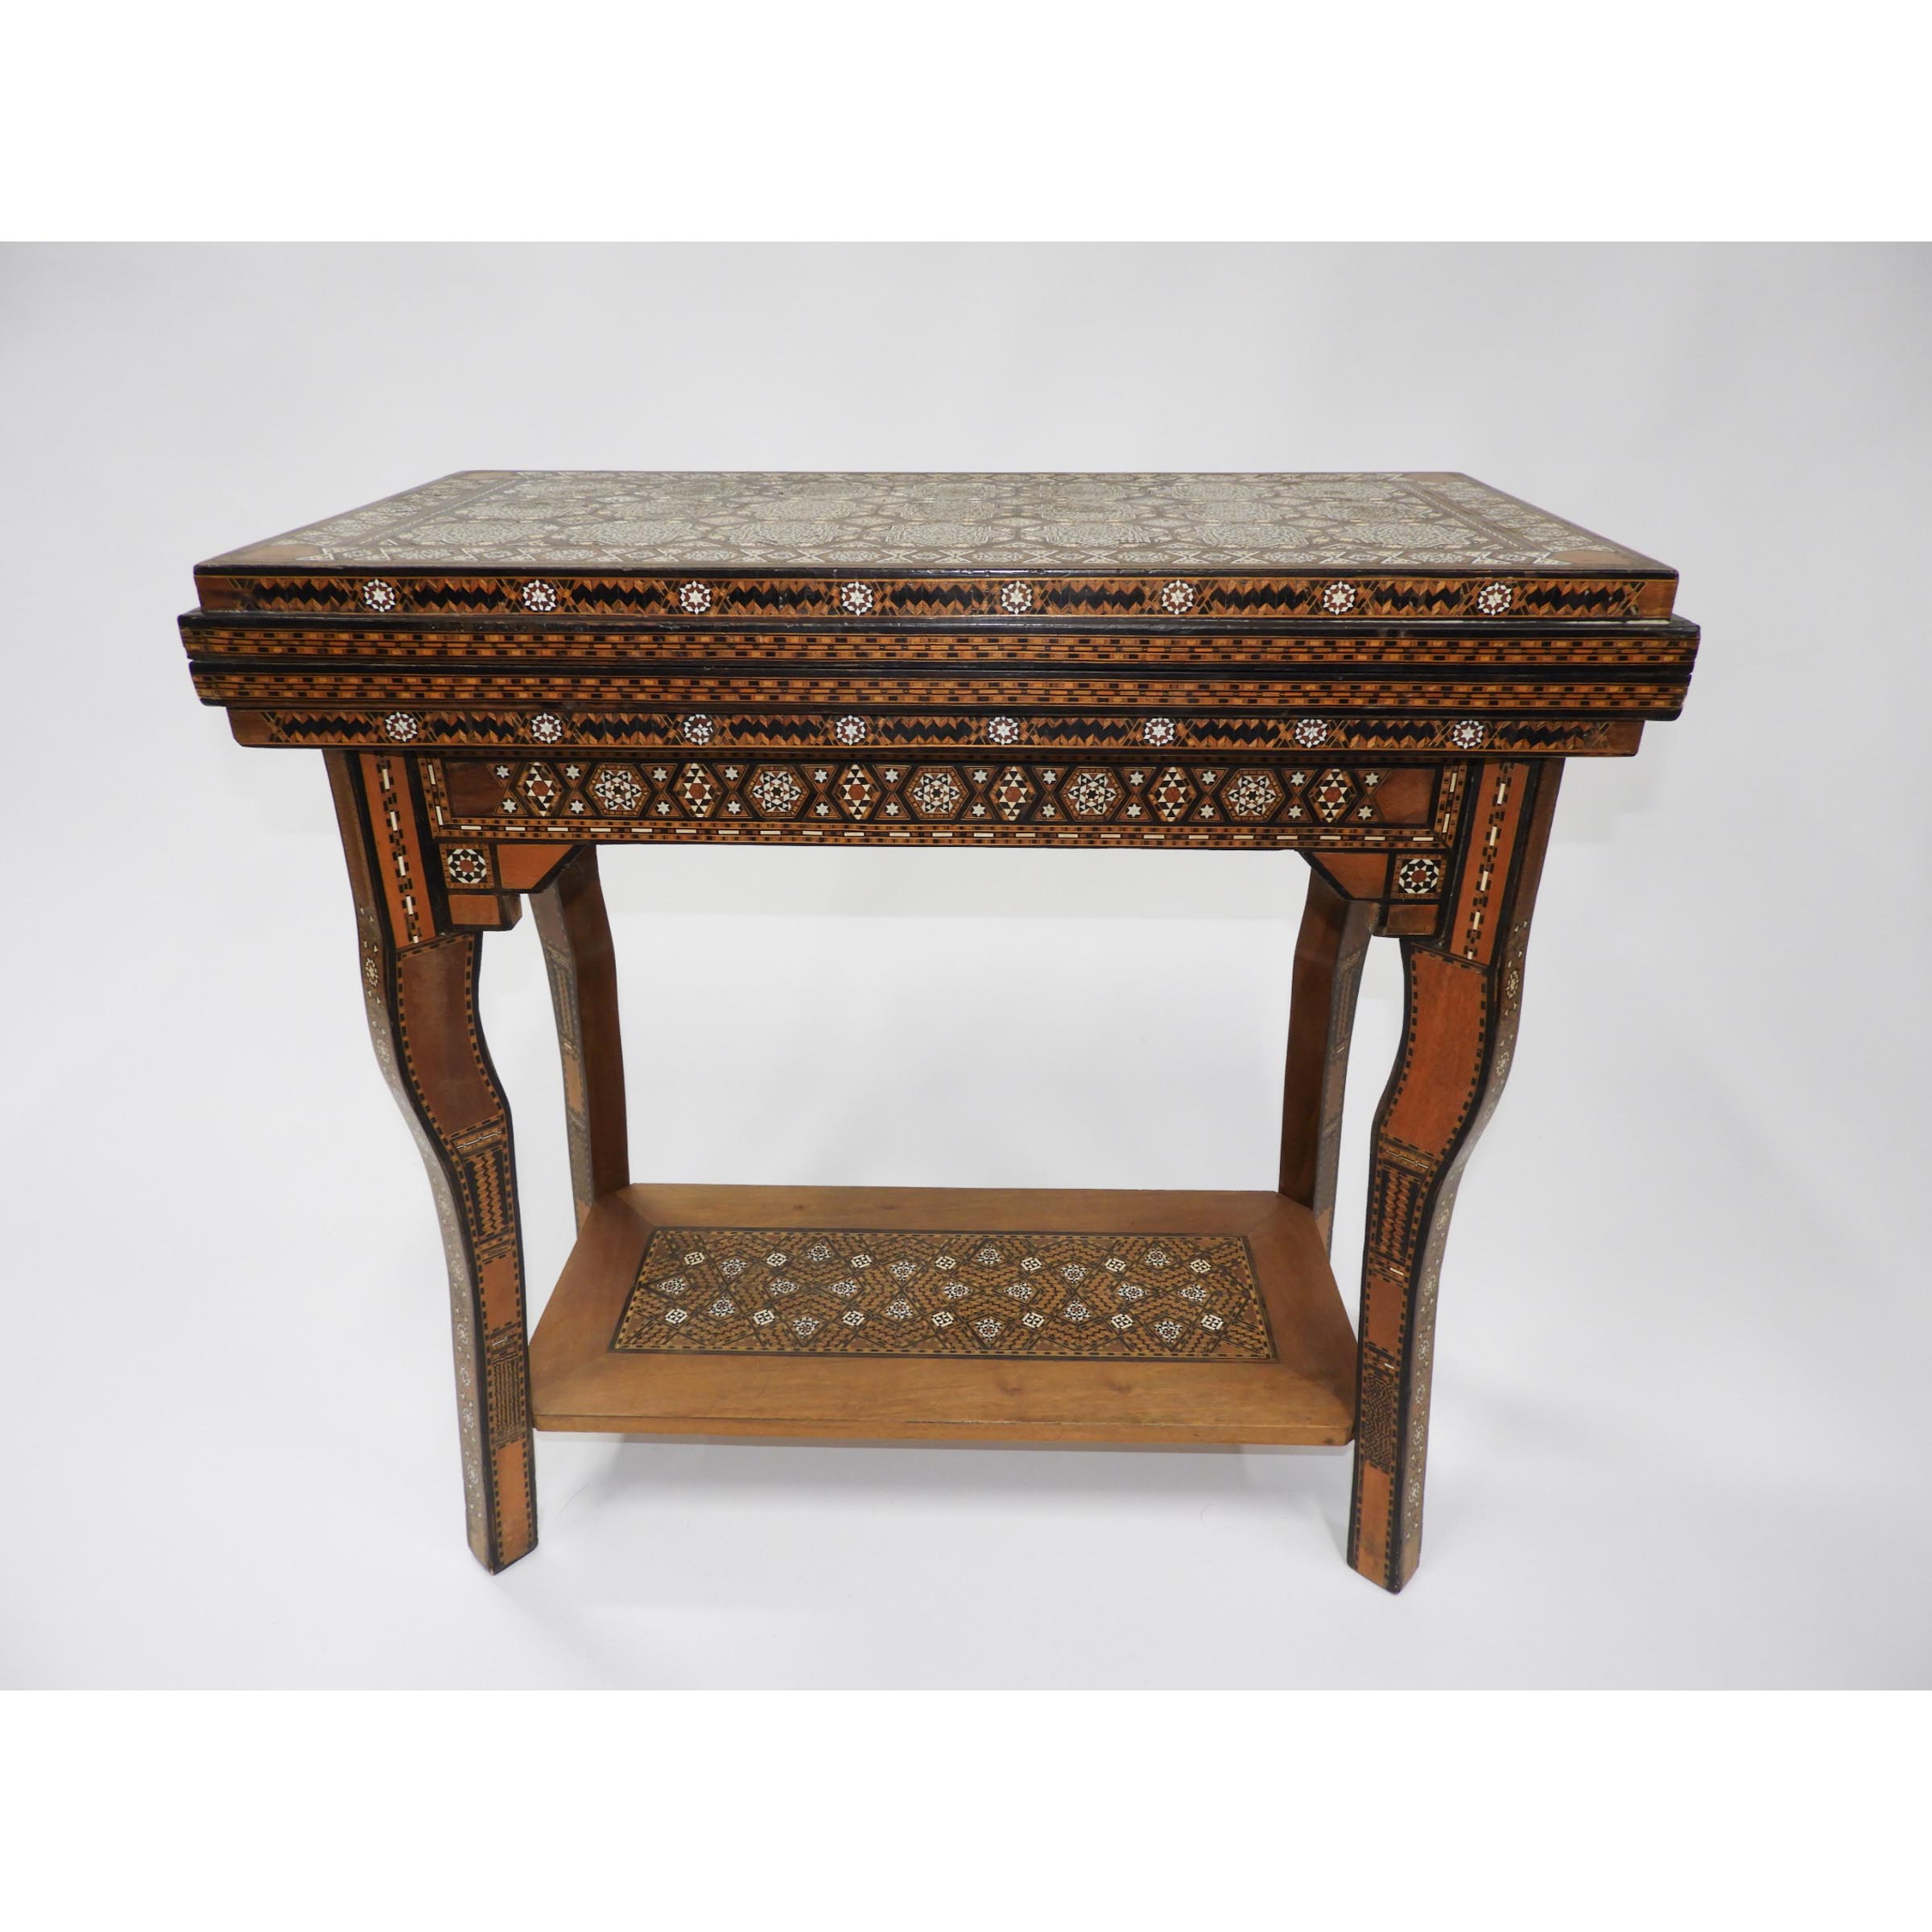 Syrian Inlaid Games Table mid 20th century